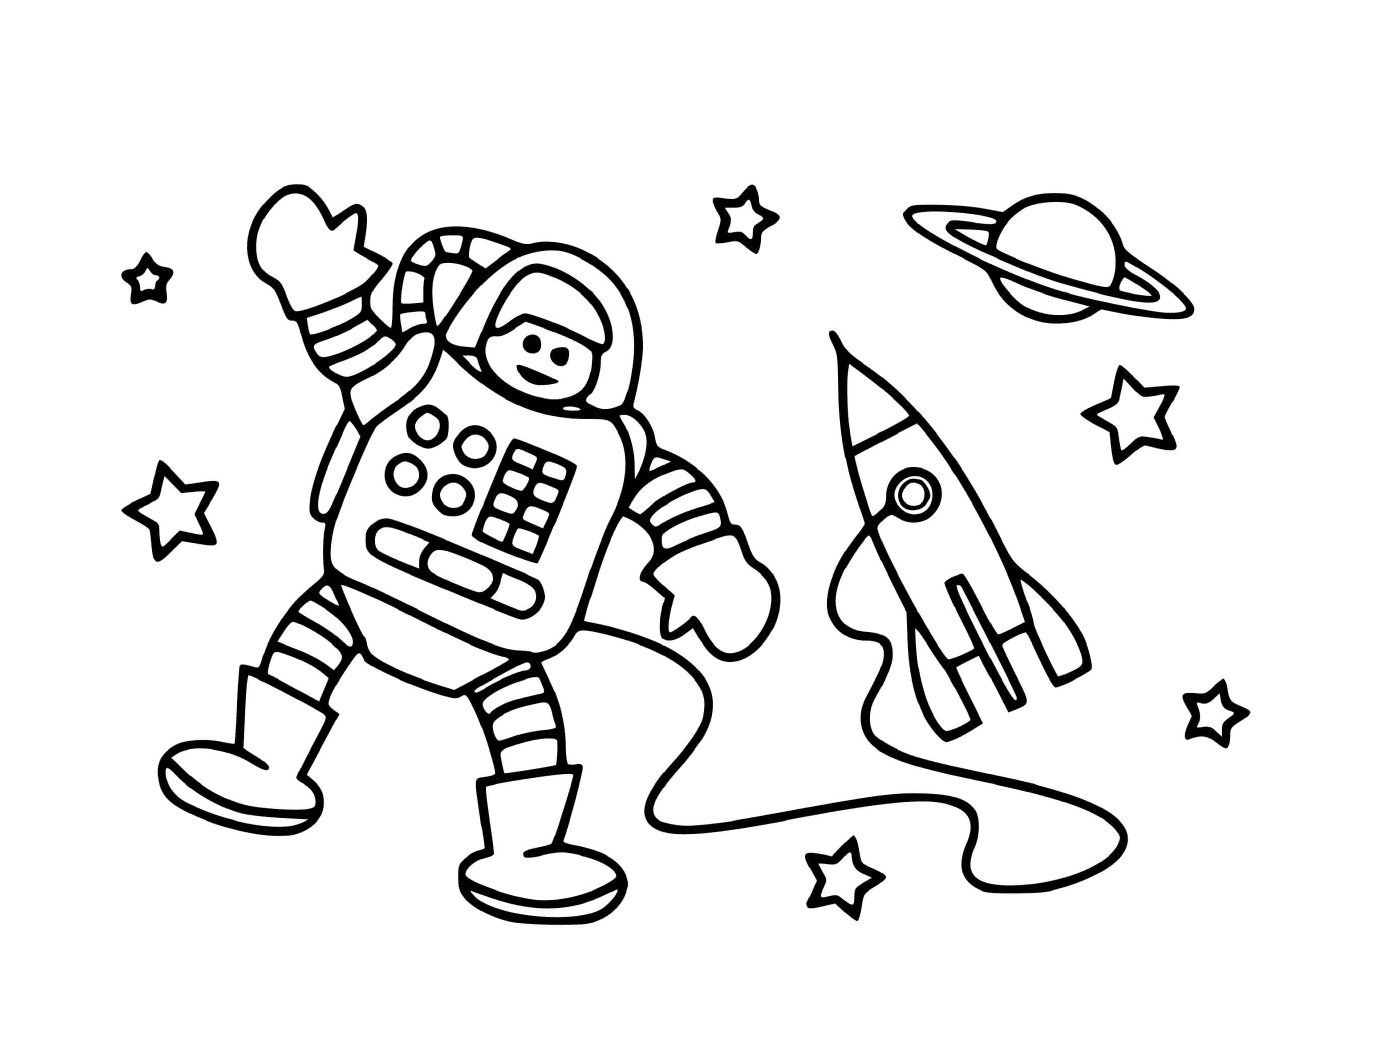  Astronaut and space rocket 